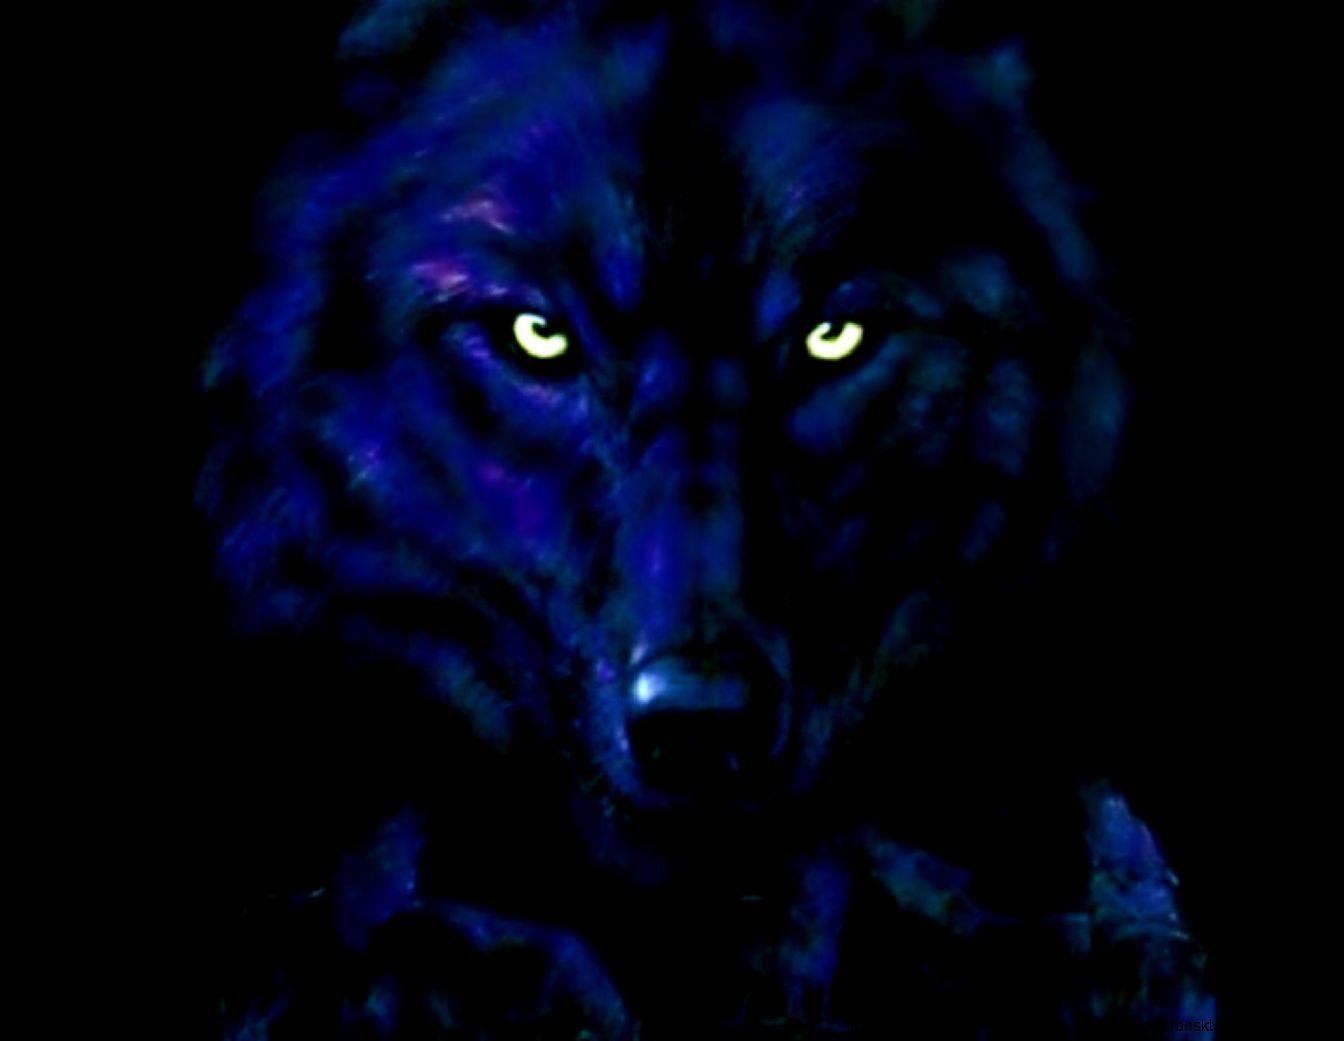 Wolf Abstract Black Wallpaper HD. Free High Definition Wallpaper